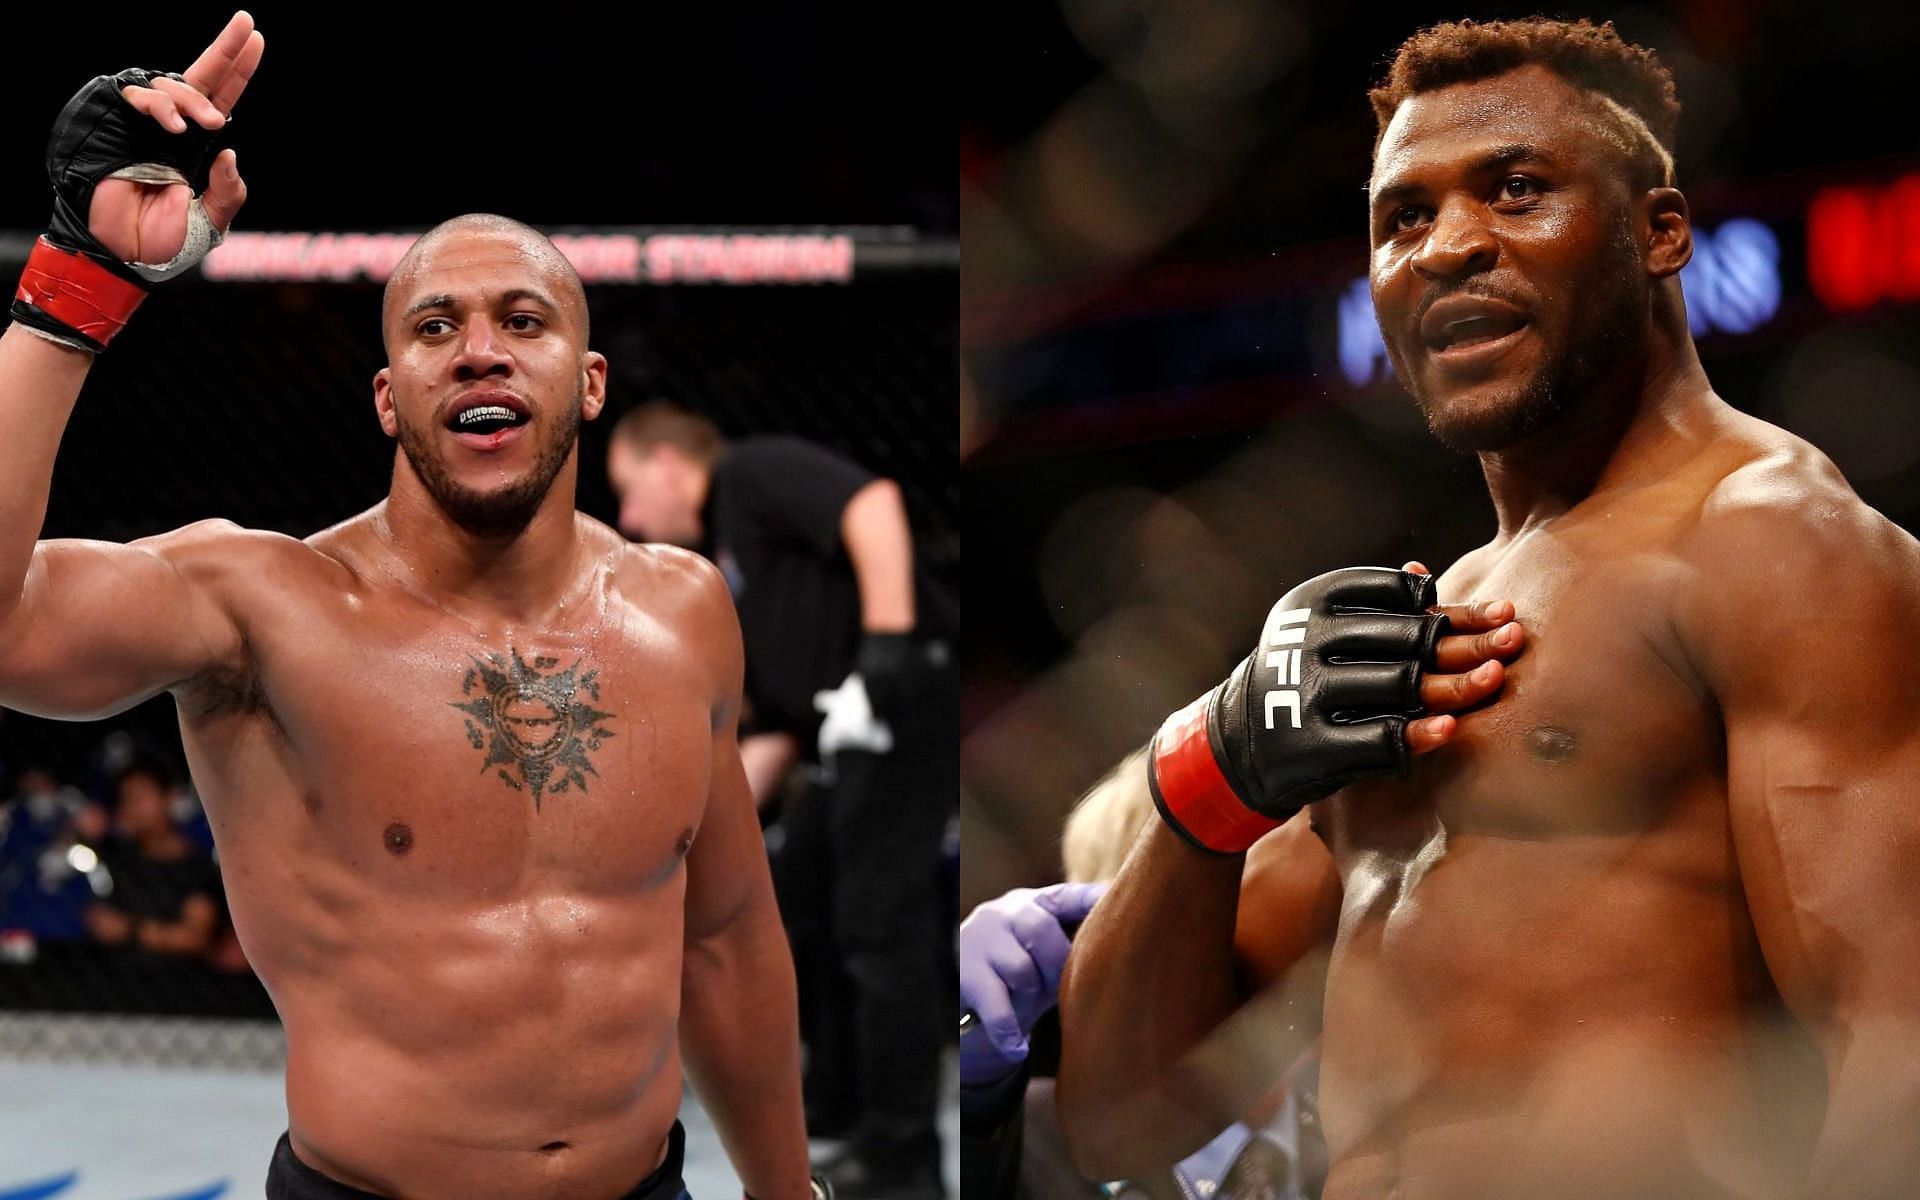 Gane (L) and Ngannou (R) will clash at UFC 270